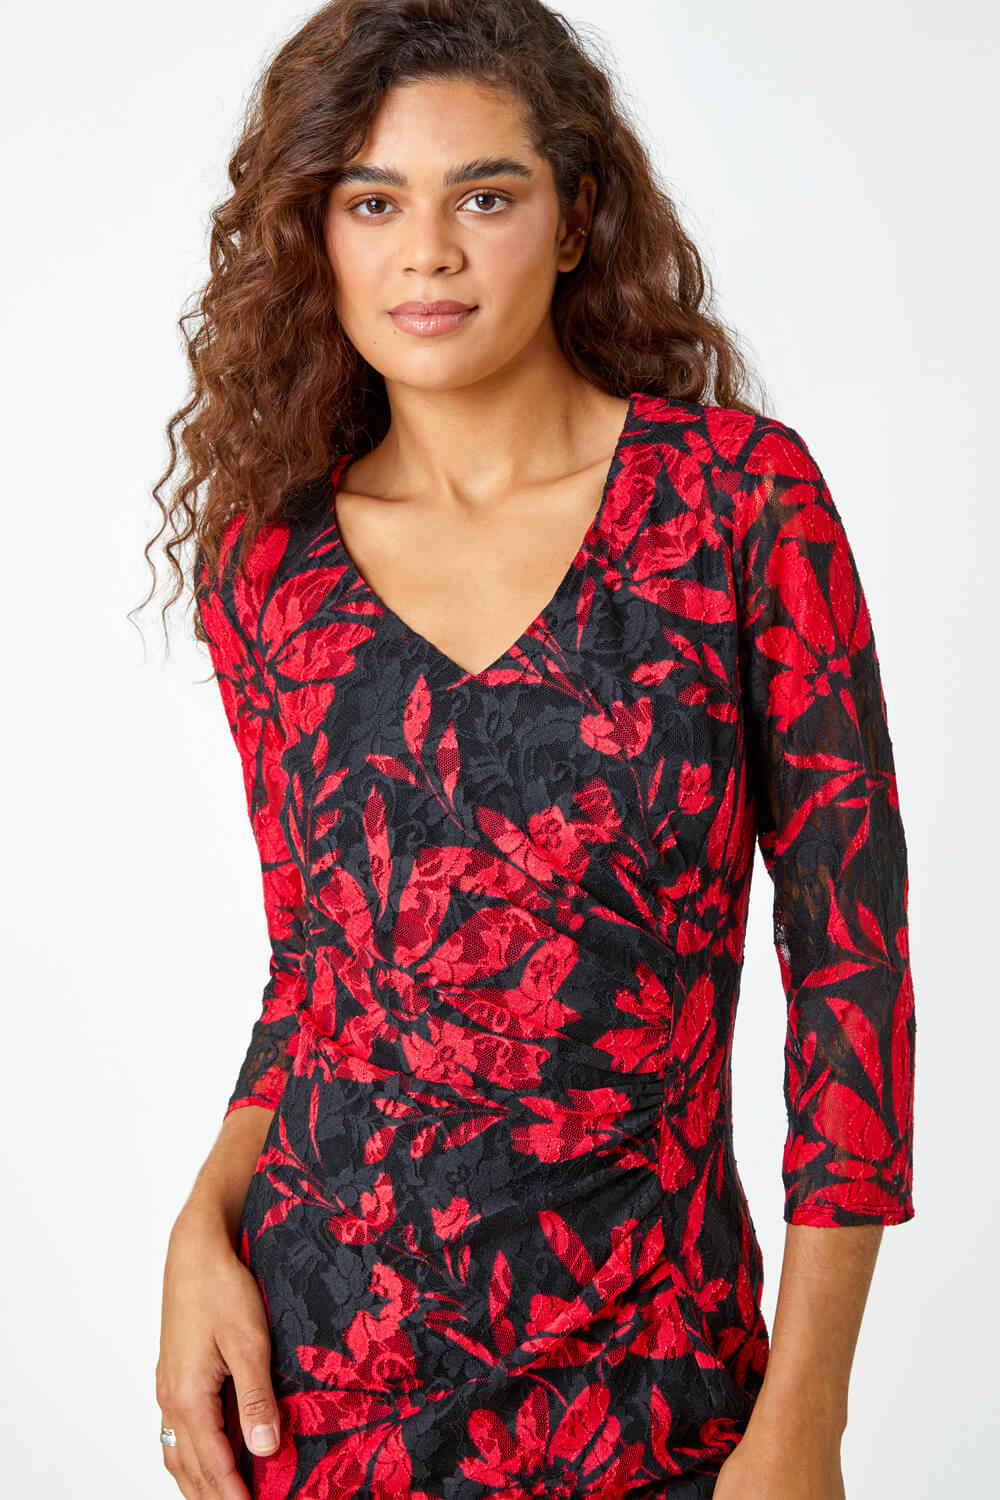 Red Floral Print Lace Shift Stretch Dress , Image 4 of 5